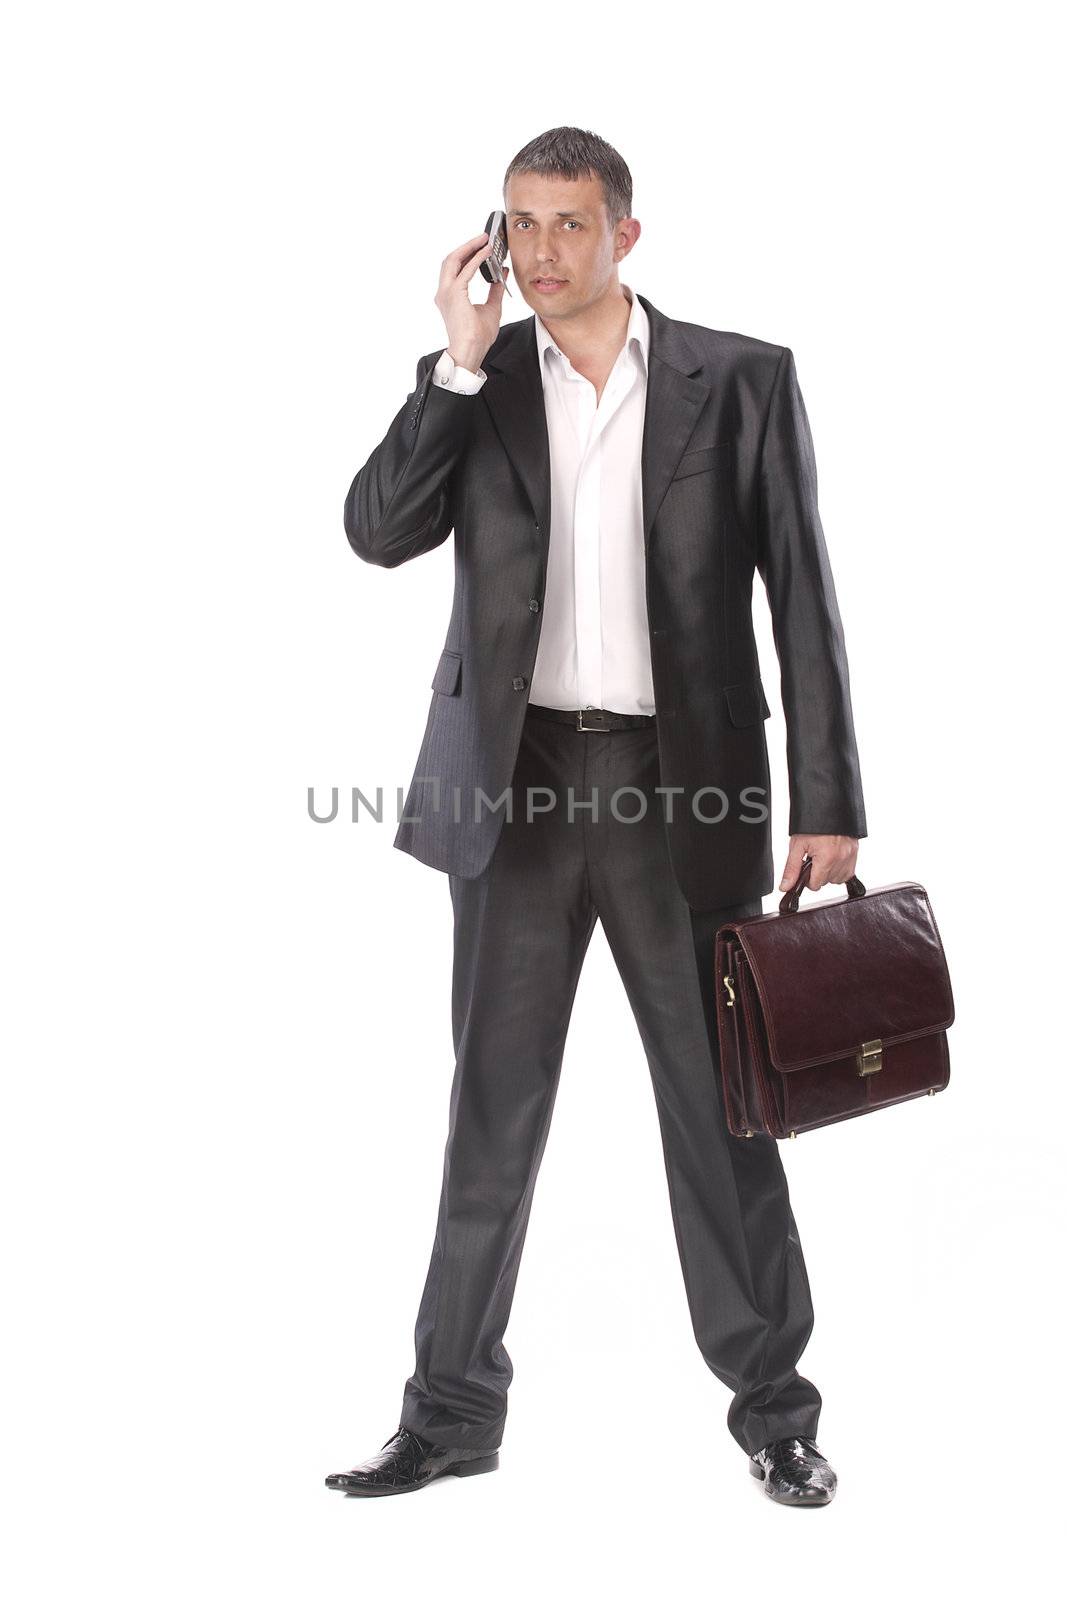 The successful businessman by sergey150770SV